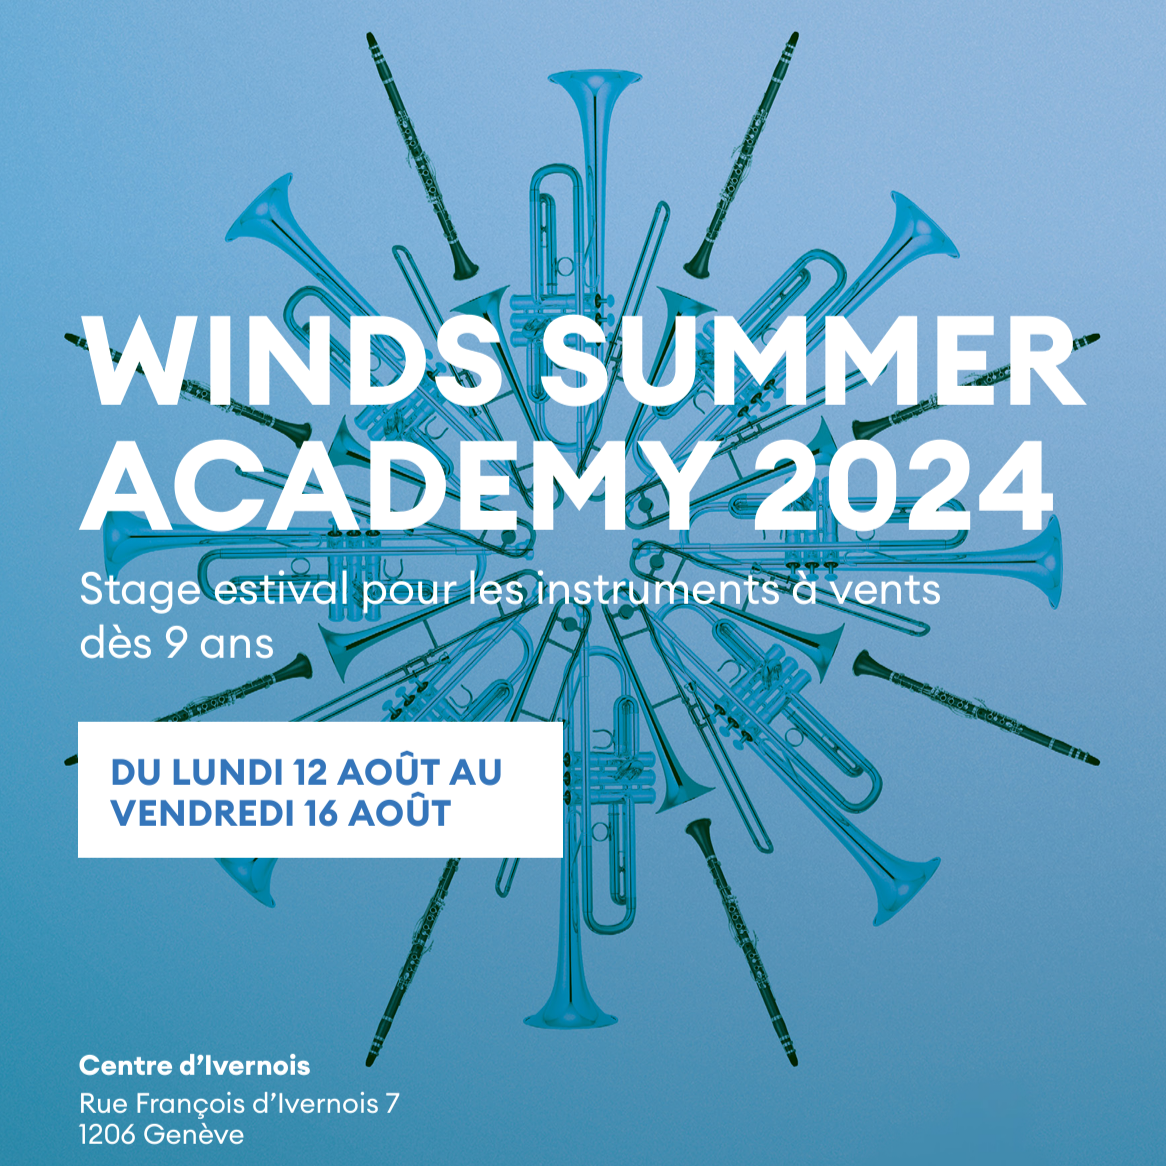 You are currently viewing Stage de la Winds Summer Academy 2024